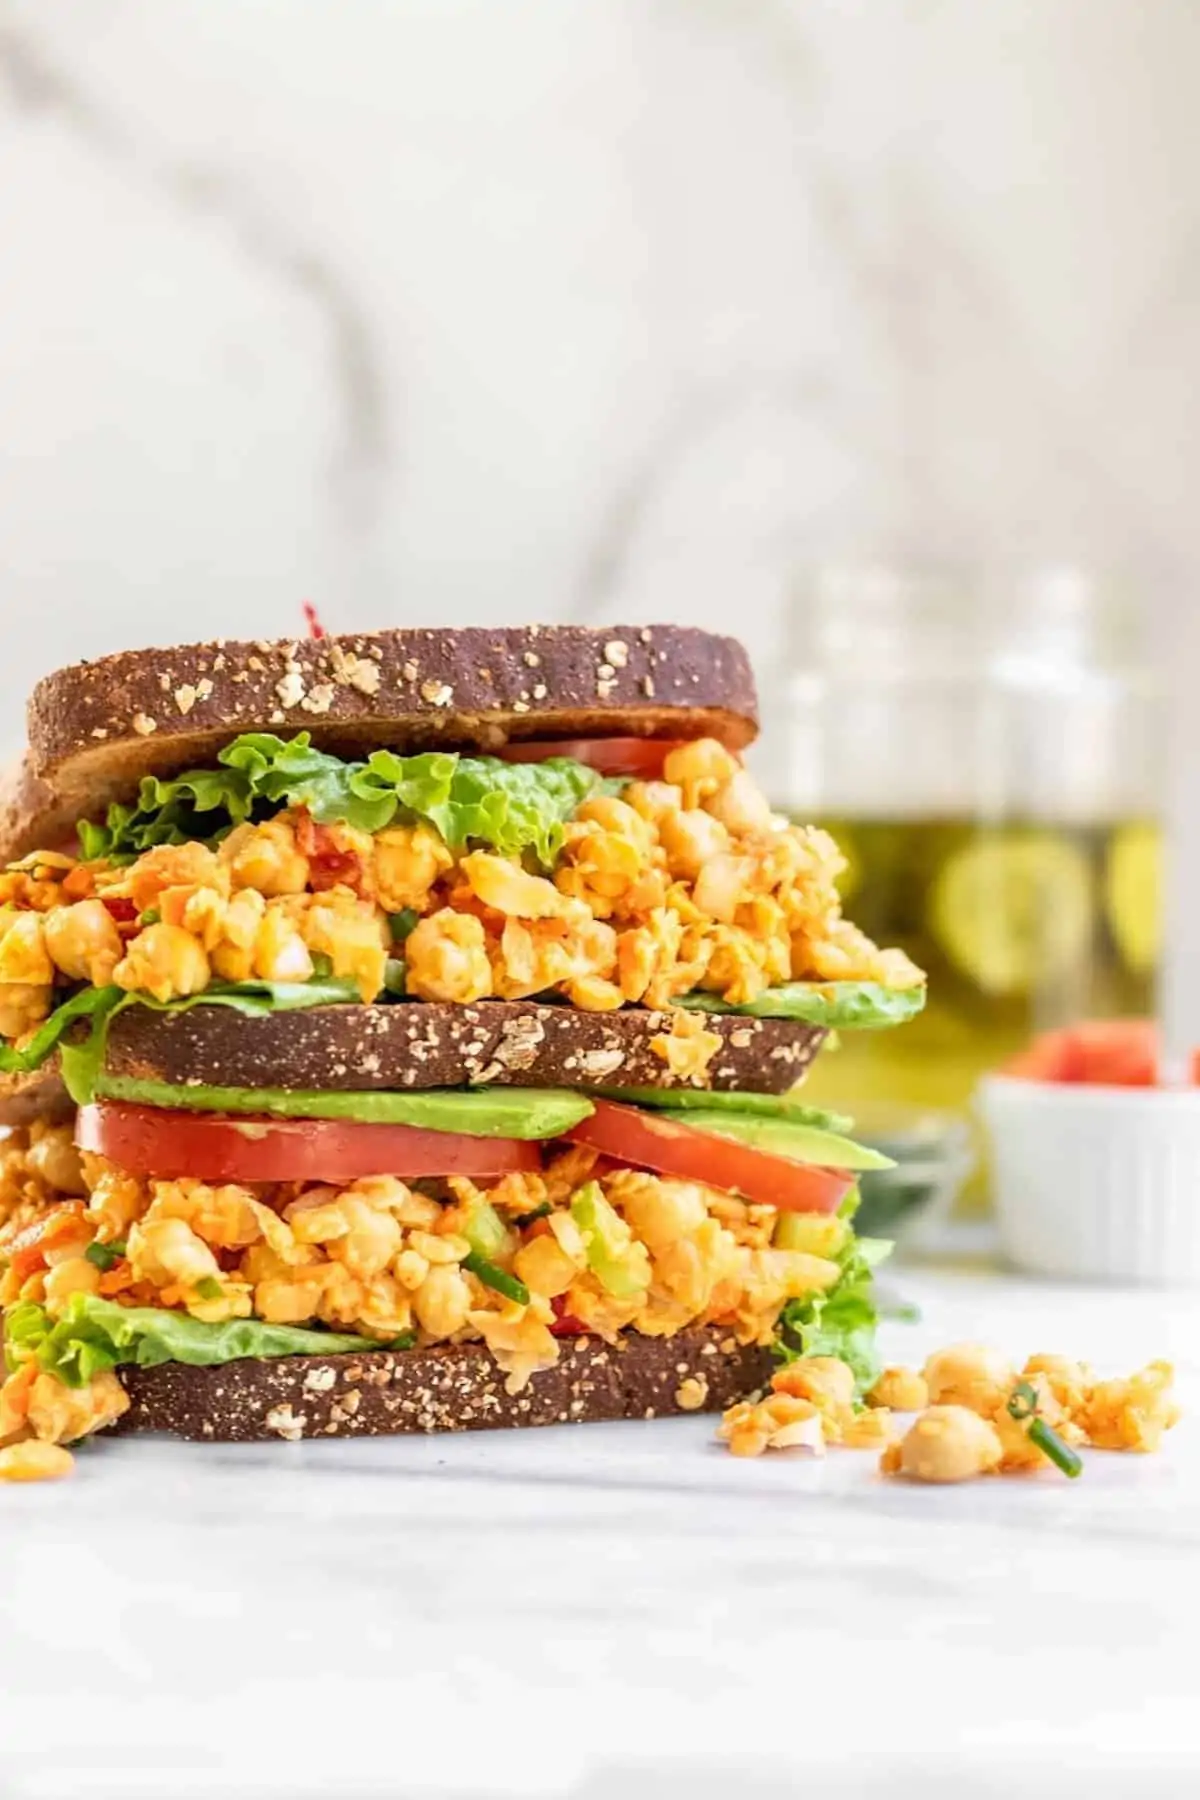 Double decker sandwich with chickpea salad, lettuce and tomato. 